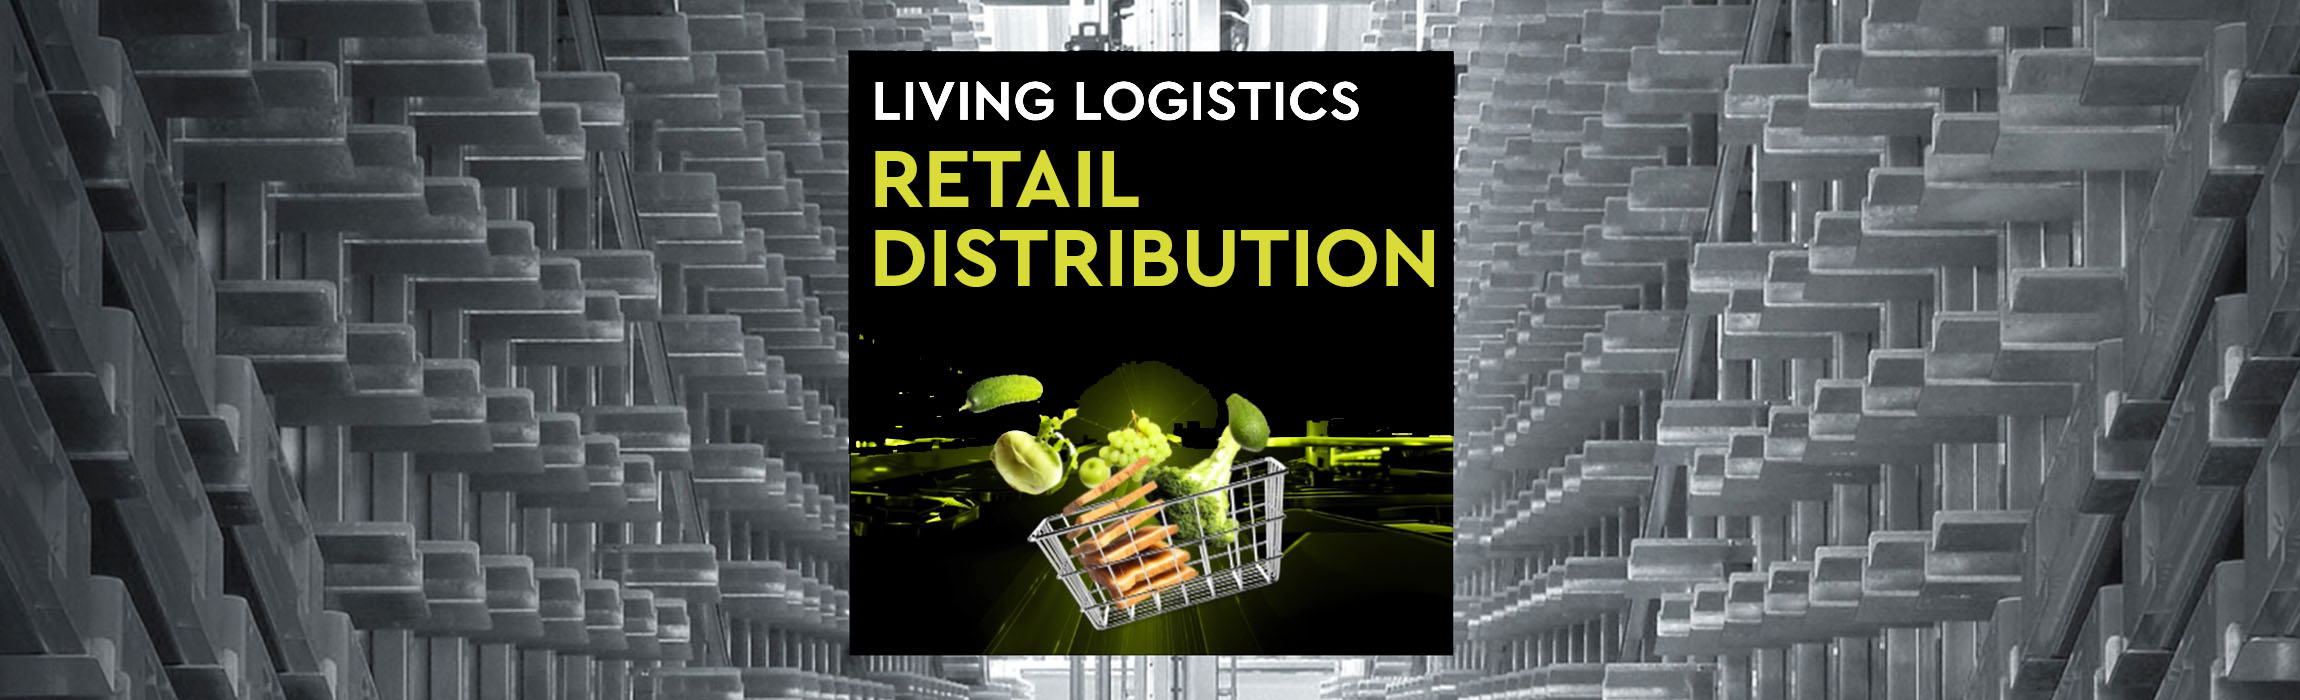 Retail distribution: The right automation solution with efficient technology for fresh and frozen goods.